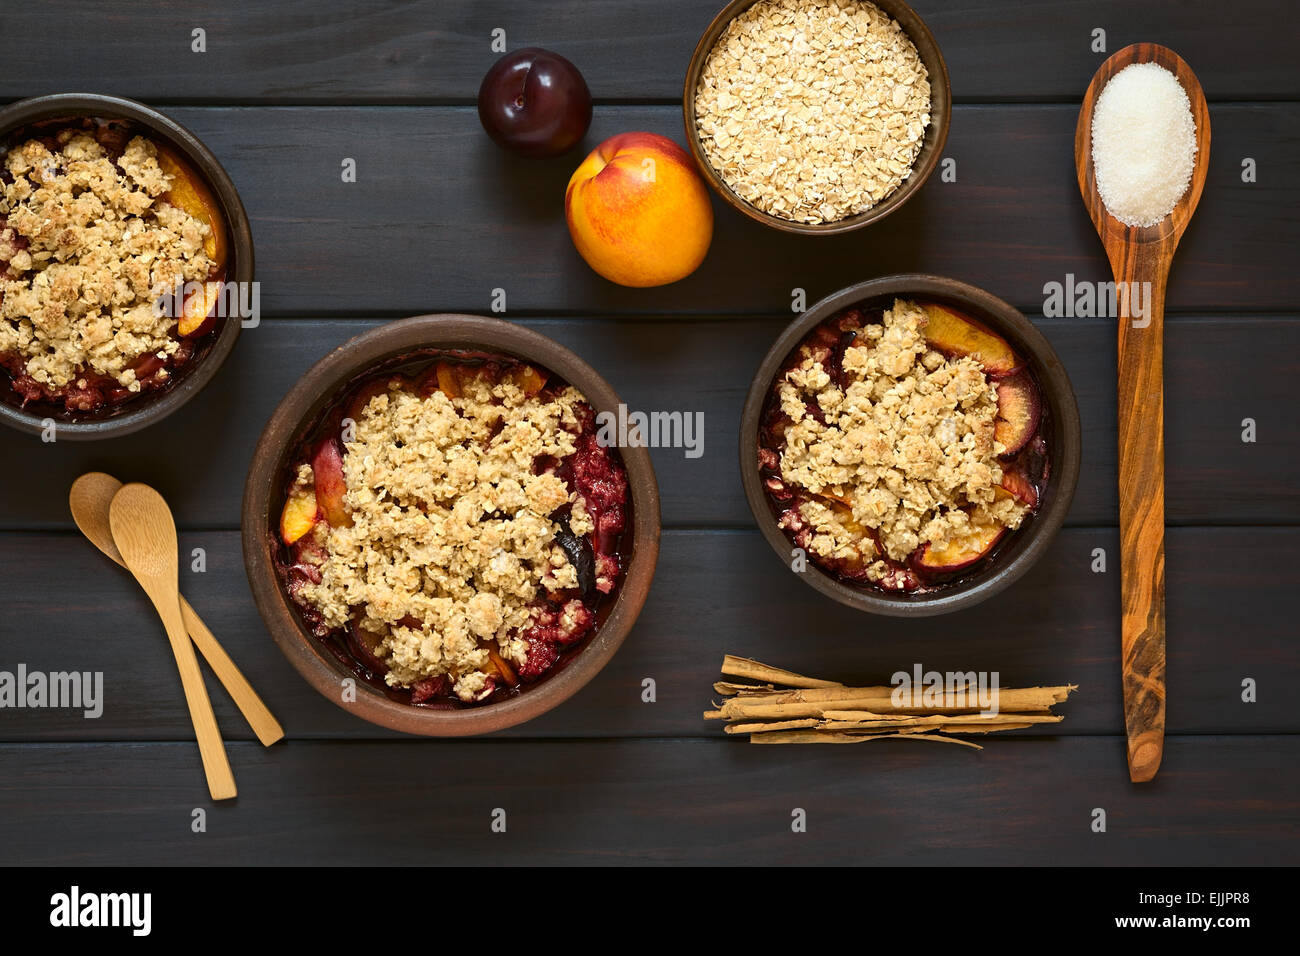 Overhead shot of rustic bowls filled with baked plum and nectarine crumble or crisp, photographed on dark wood Stock Photo